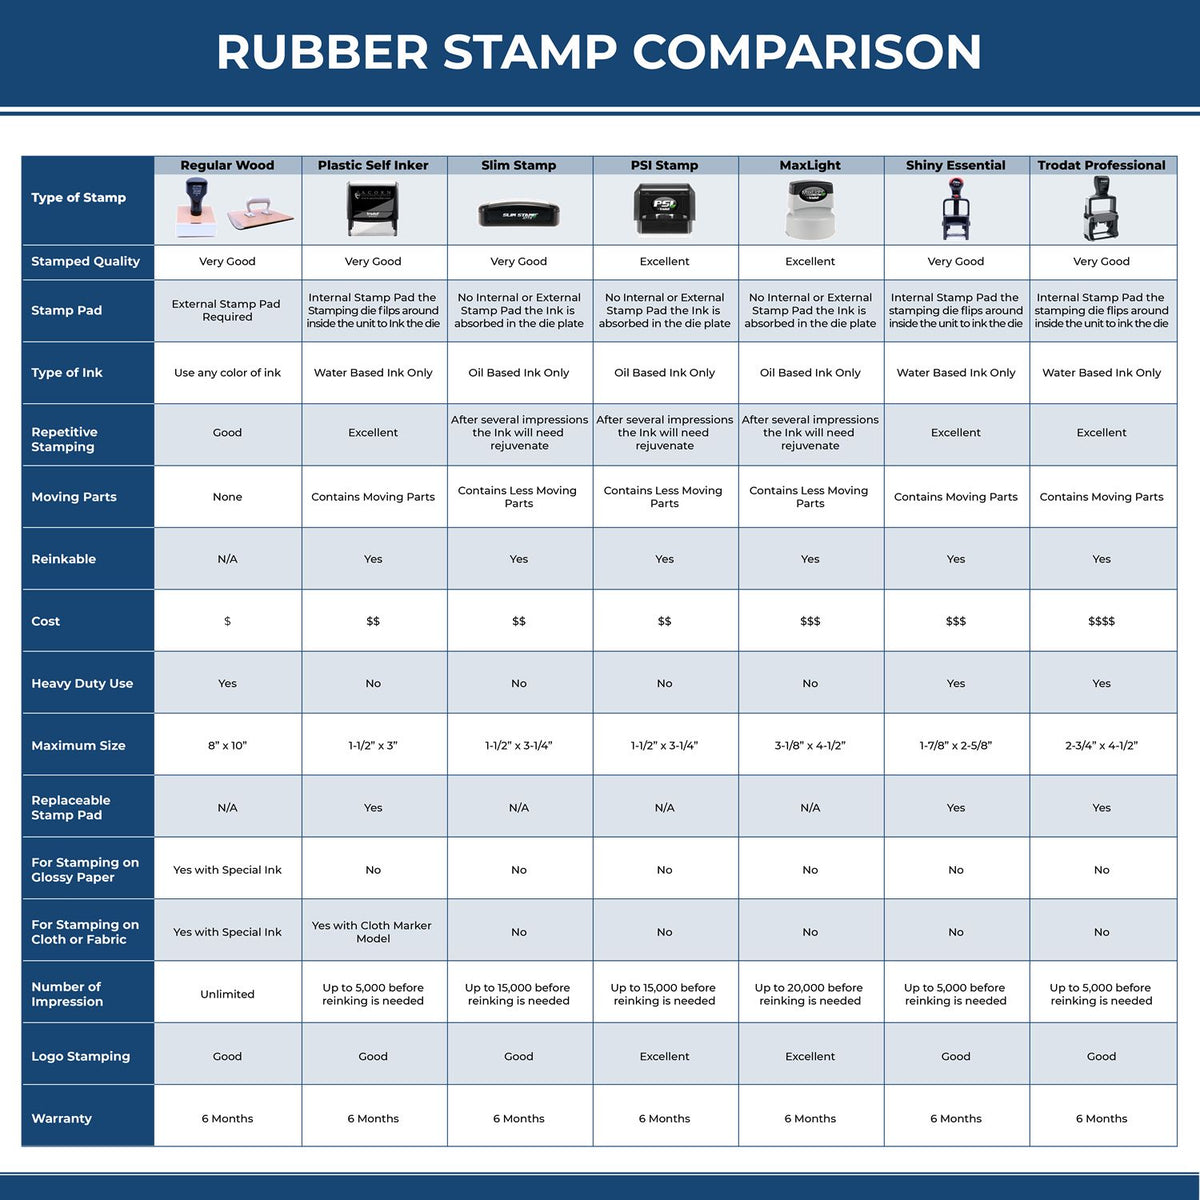 A comparison chart for the different types of mount models available for the Super Slim Iowa Notary Public Stamp.